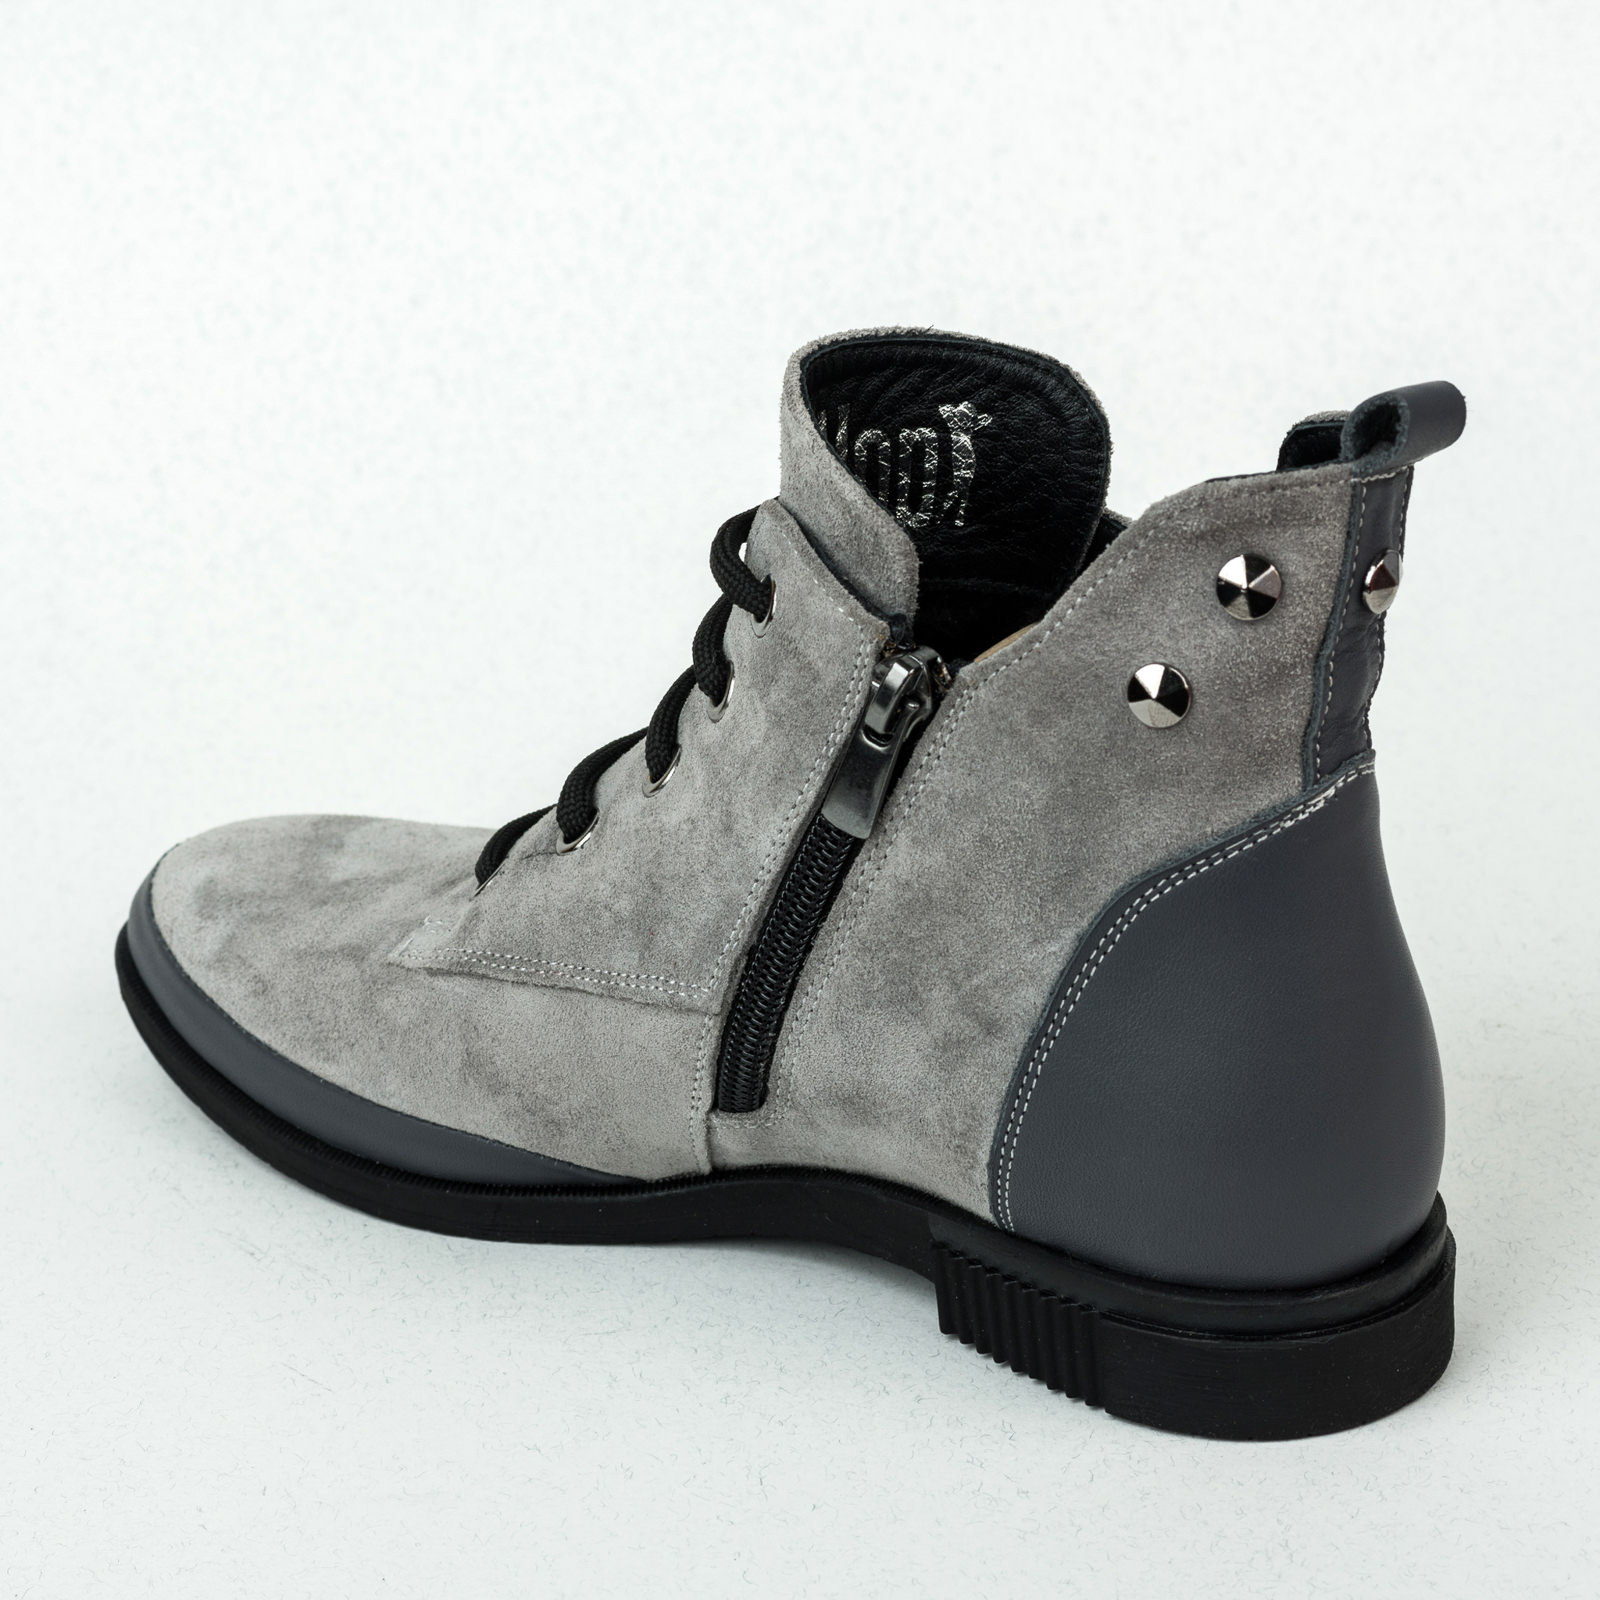 Leather ankle boots B017 - GREY